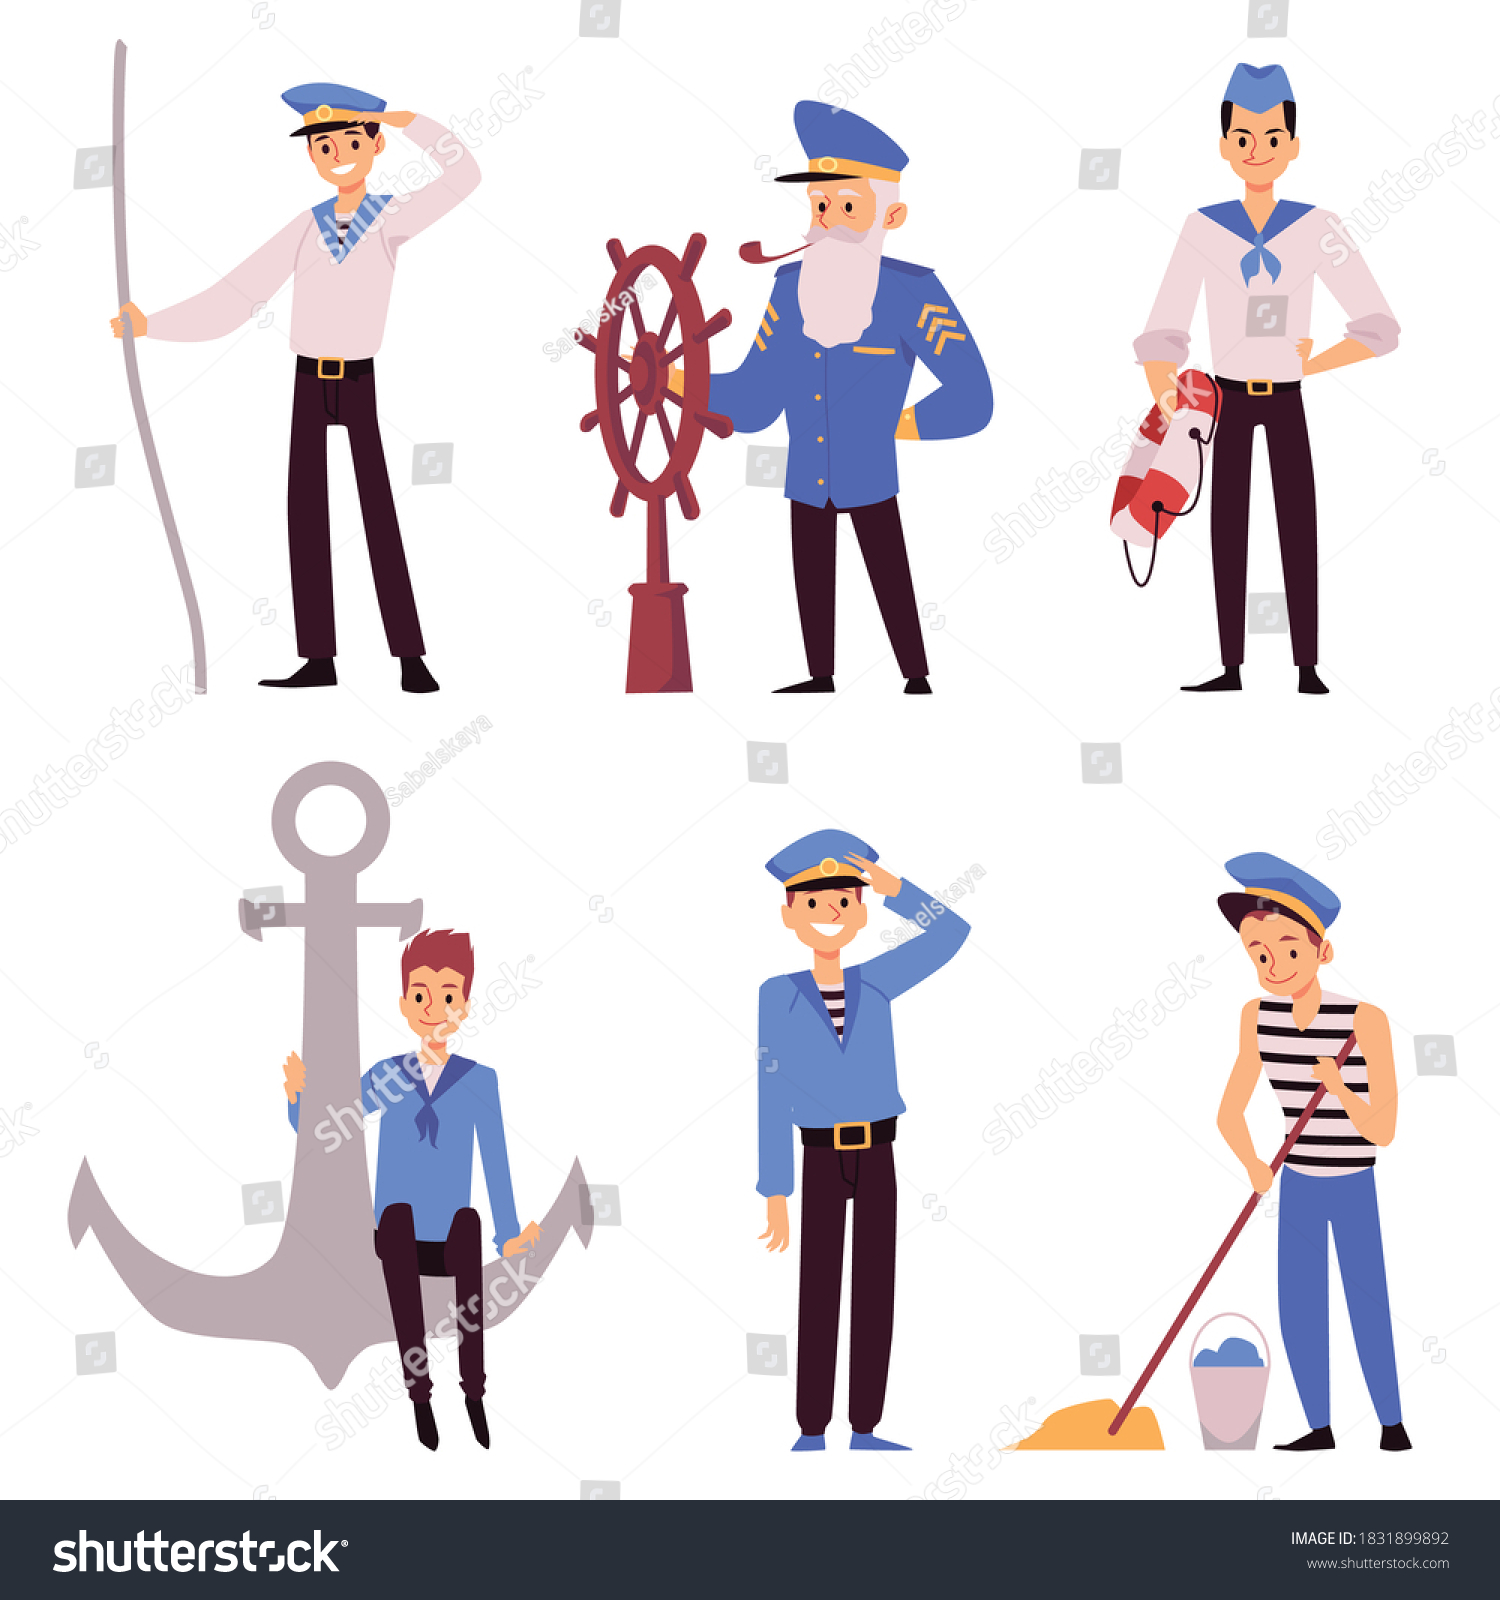 A set of cartoon characters of sailors and a captain in form in various situations. The seamans working on board. Flat vector illustrations isolated on a white background #1831899892